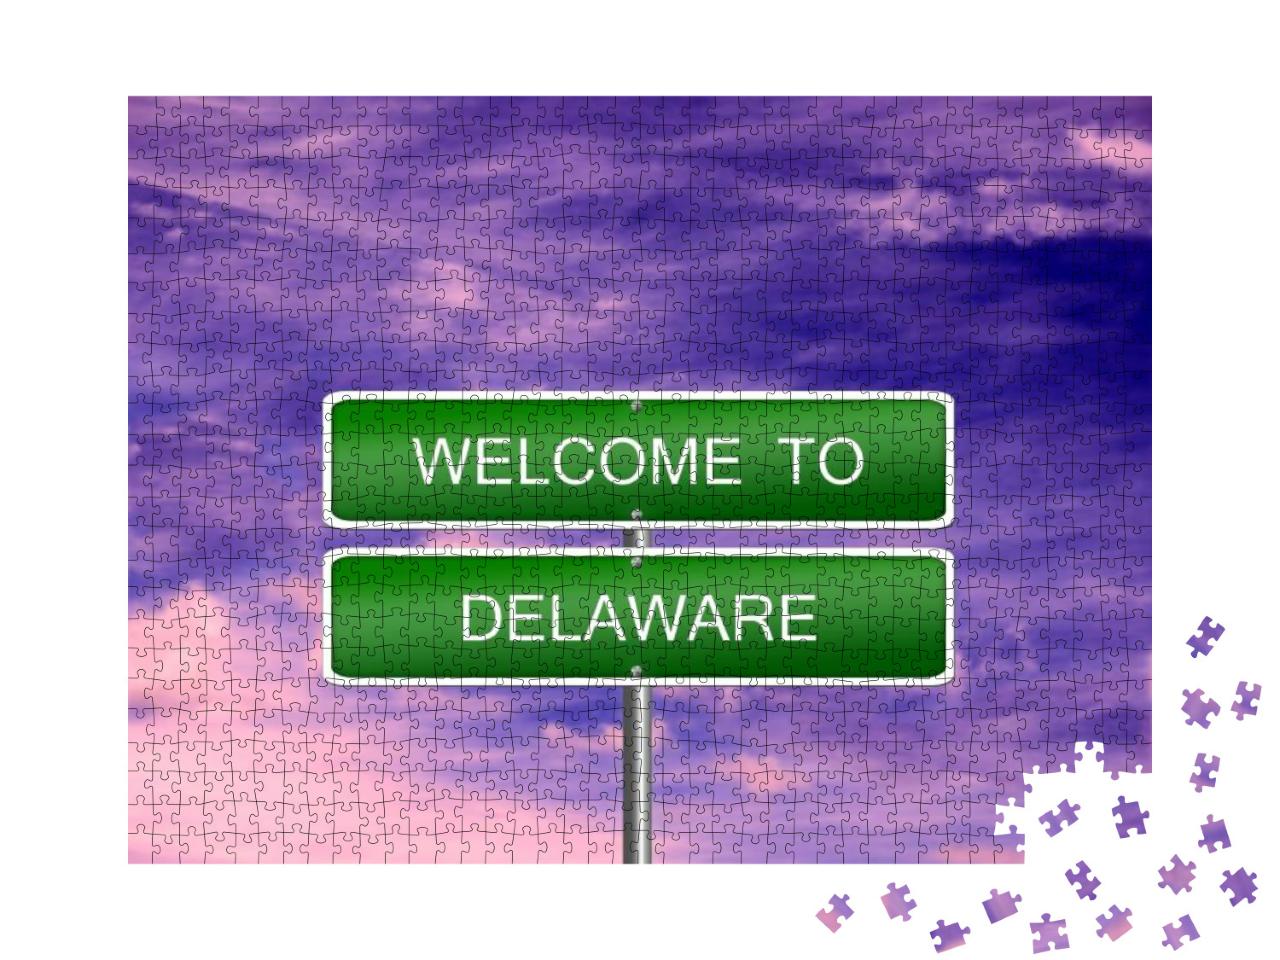 Delaware Welcome Us State Vacation Landscape USA Sign Trav... Jigsaw Puzzle with 1000 pieces